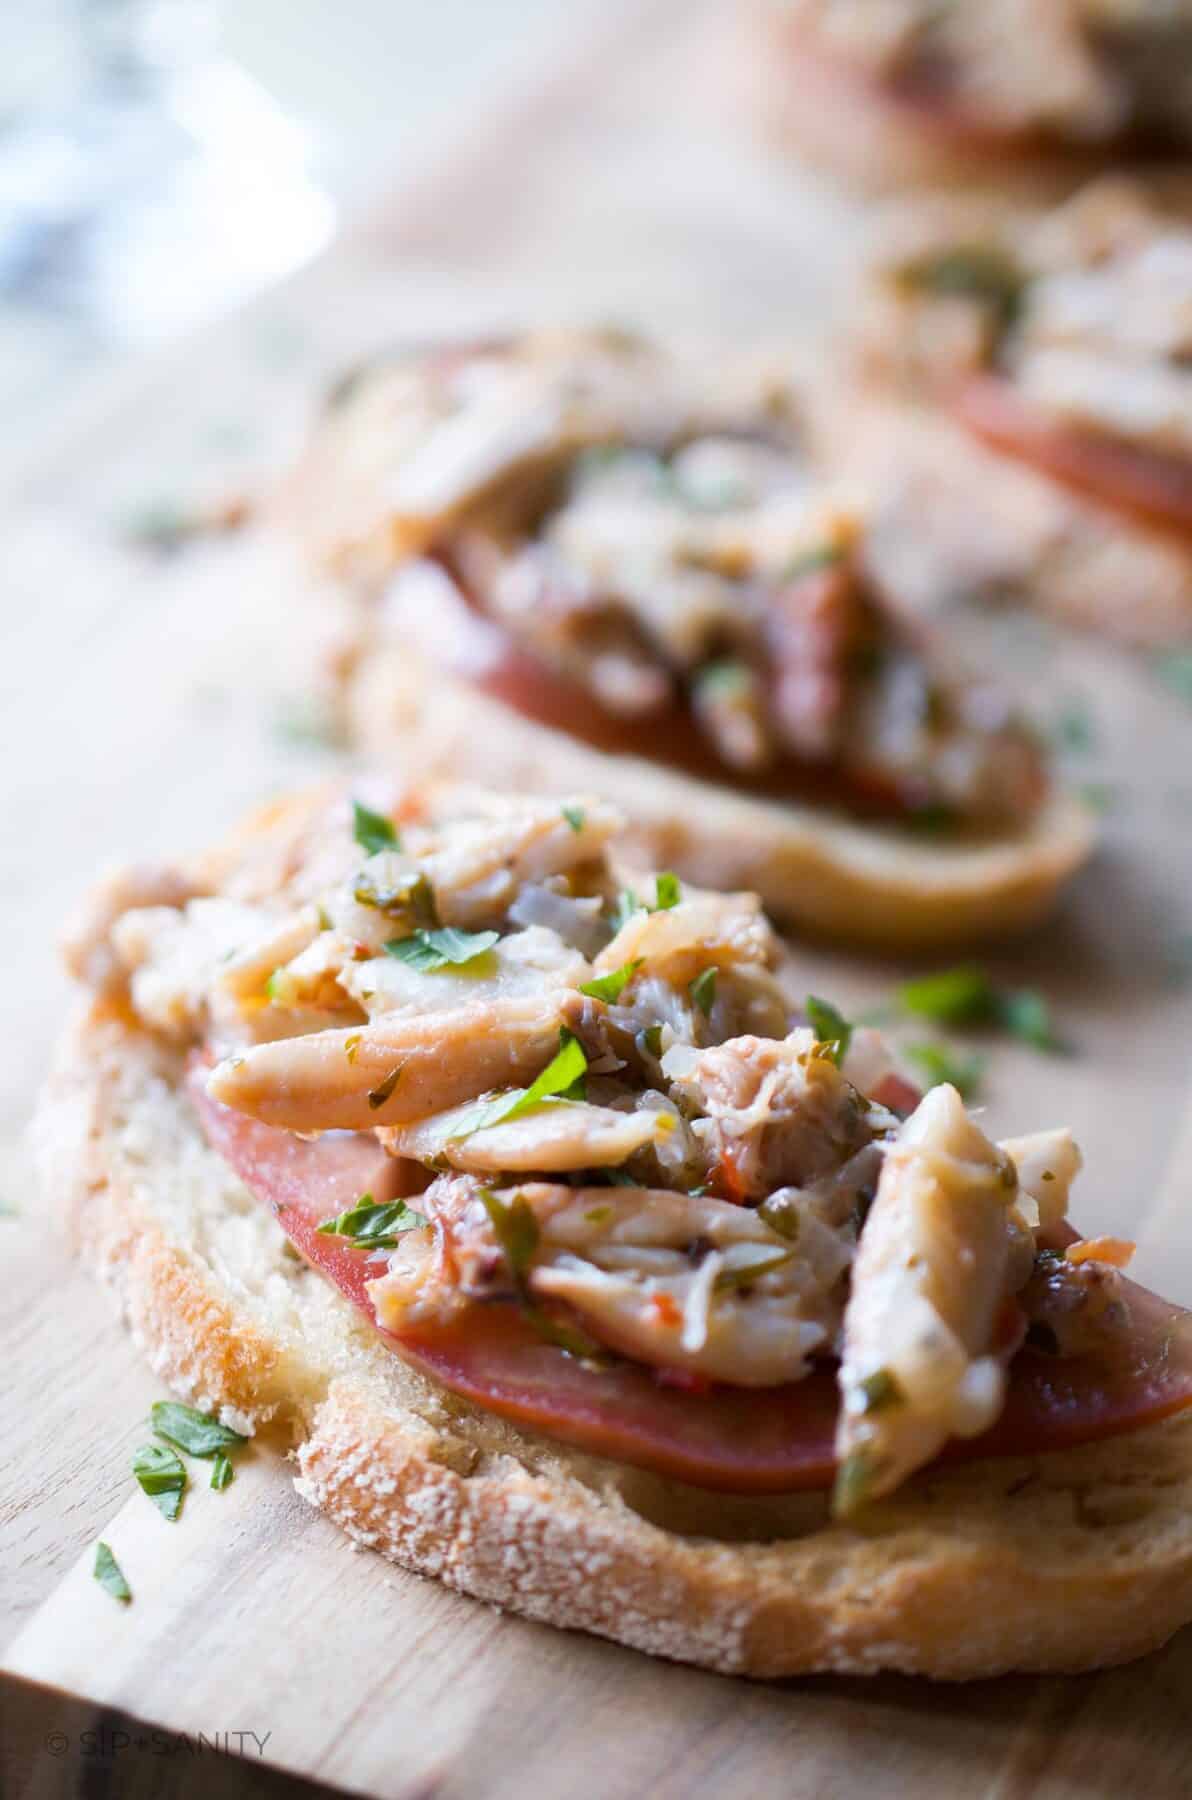 Servings of spicy warm crab bruschetta on a wood serving tray.